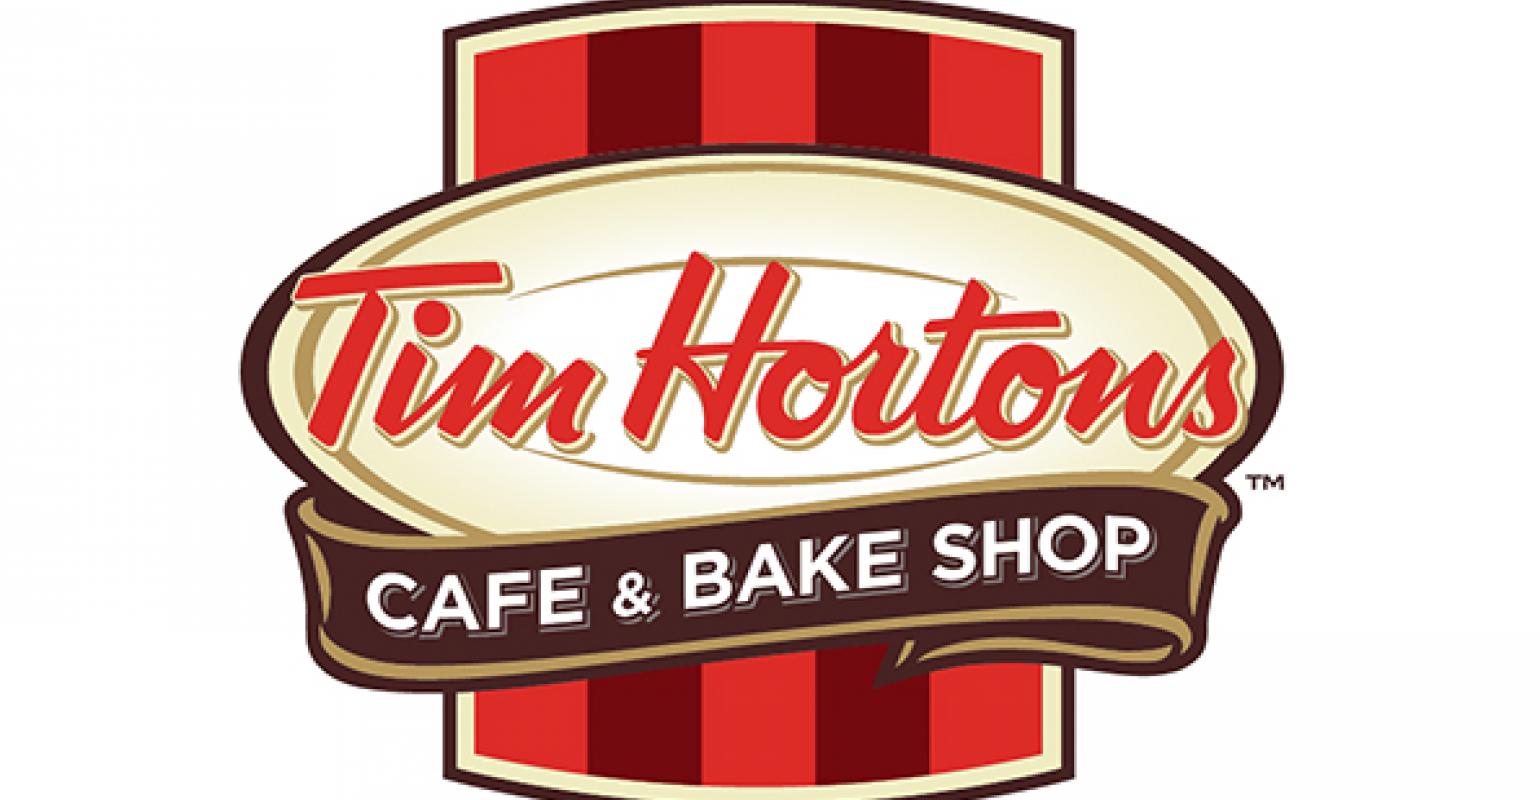 I Compared Coffee and Breakfast From Tim Hortons and Dunkin